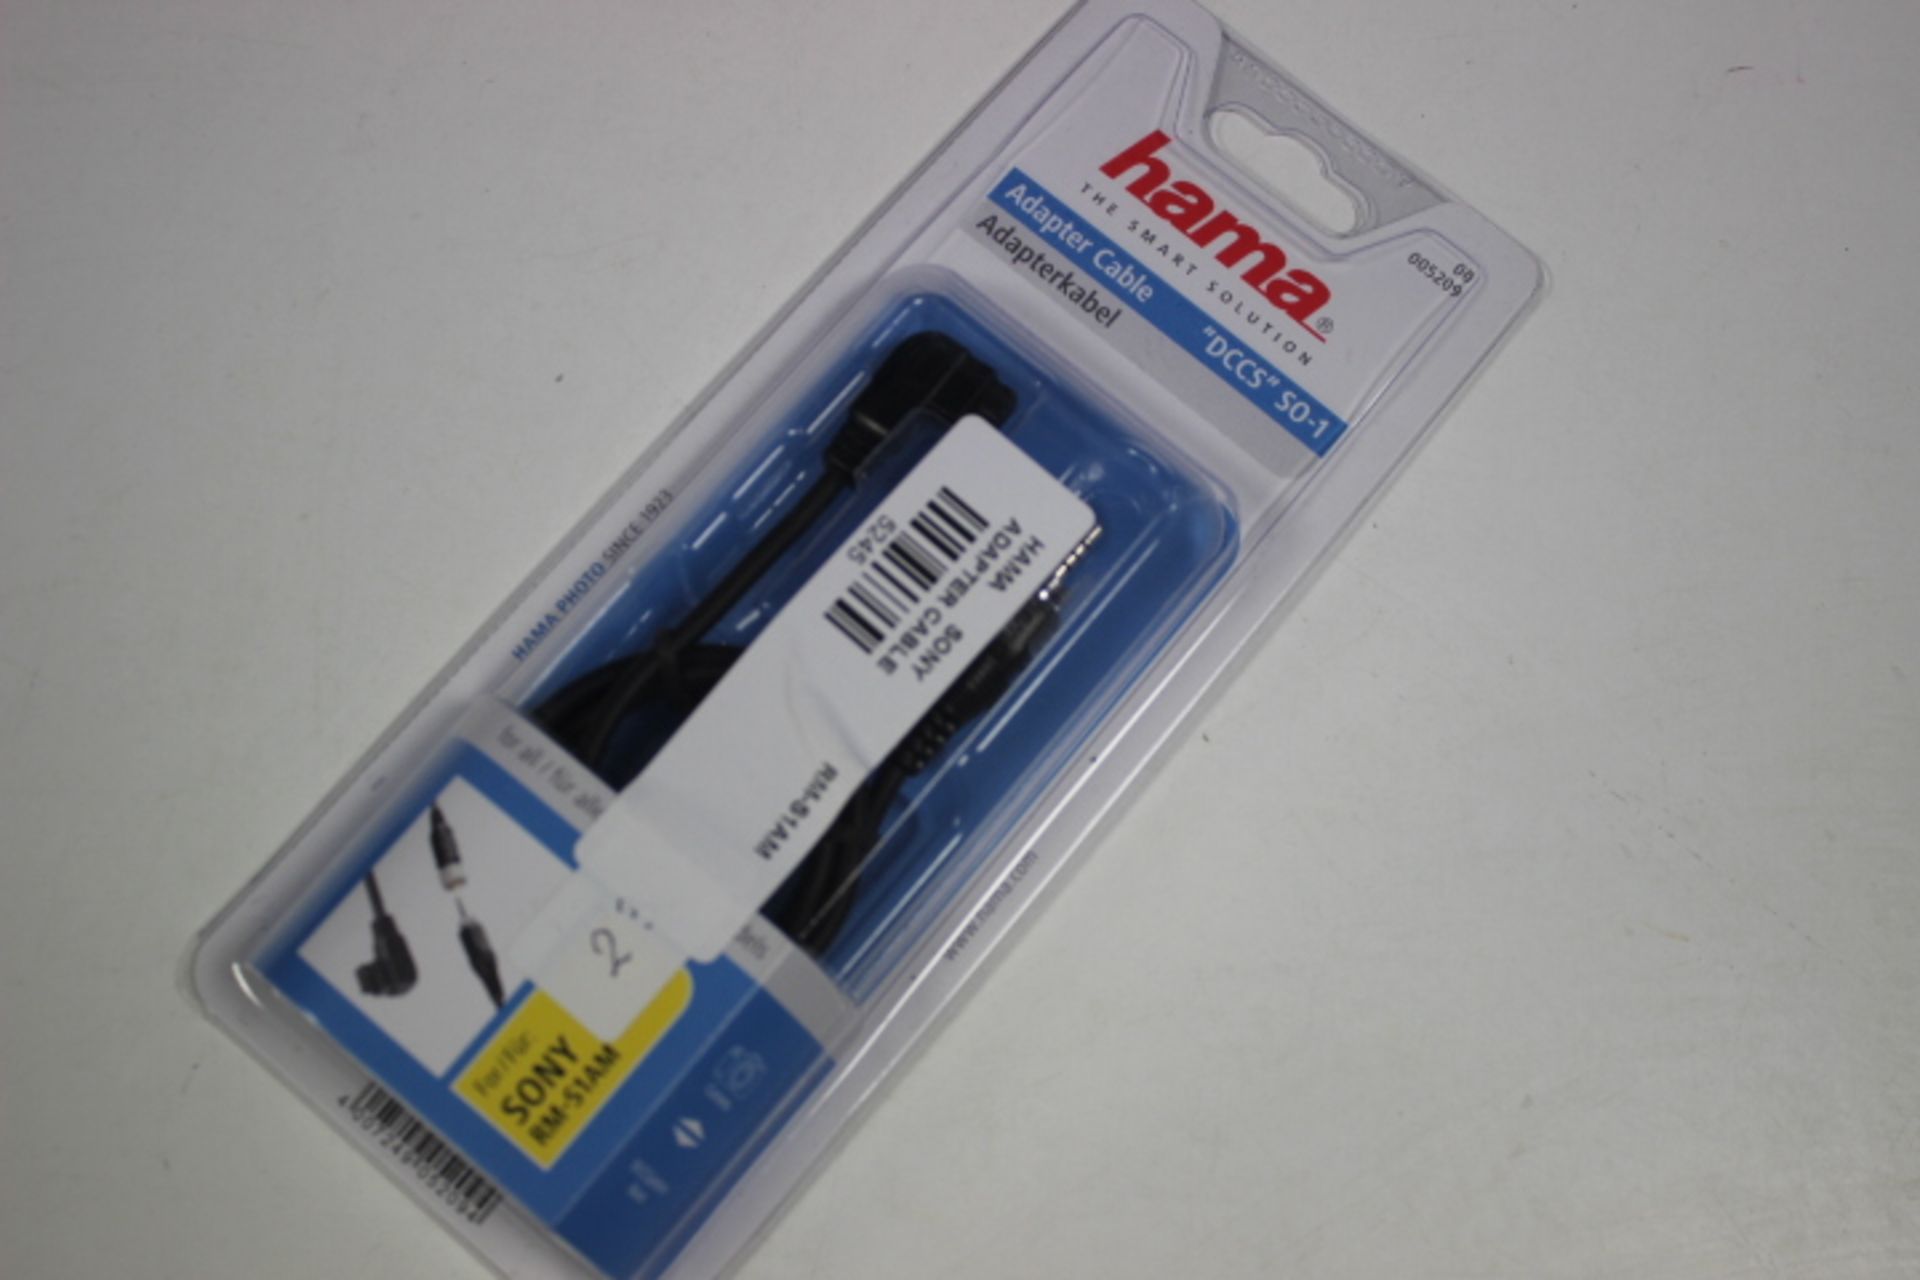 1x Hama Black Sony RM-S1AM Adapter Cable Grade A - Image 2 of 2